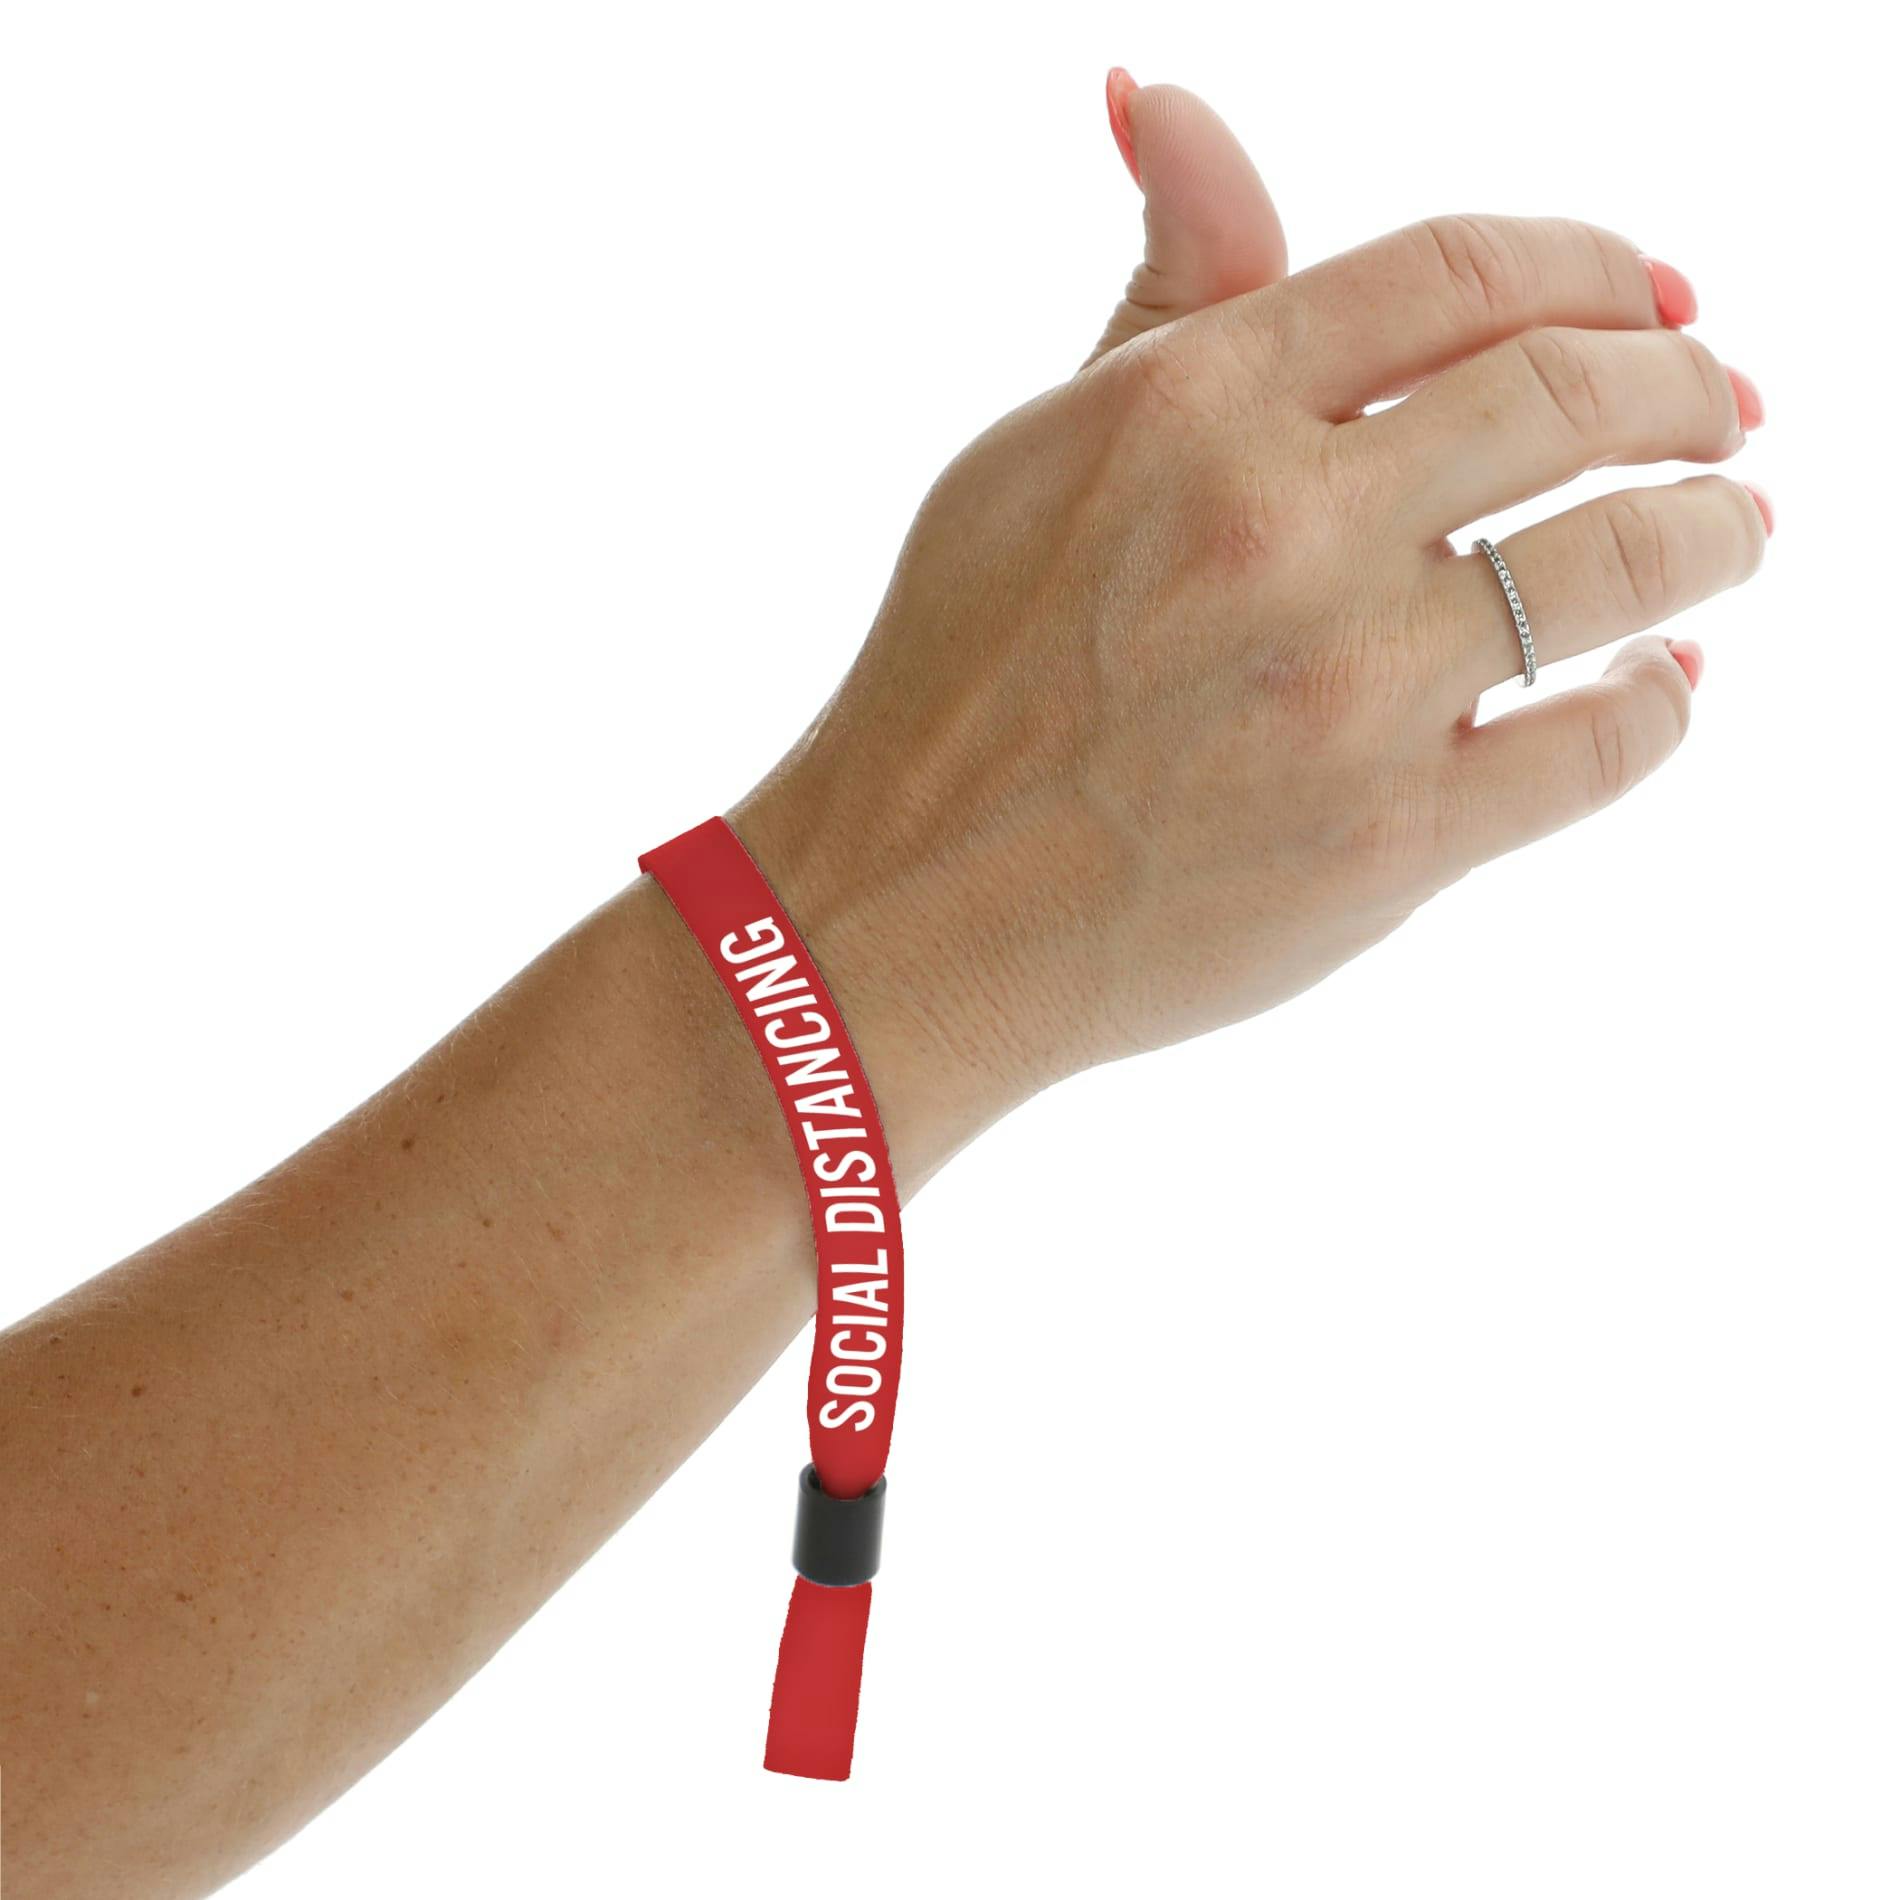 Full Color 1/2" Social Distancing Wristband - additional Image 3